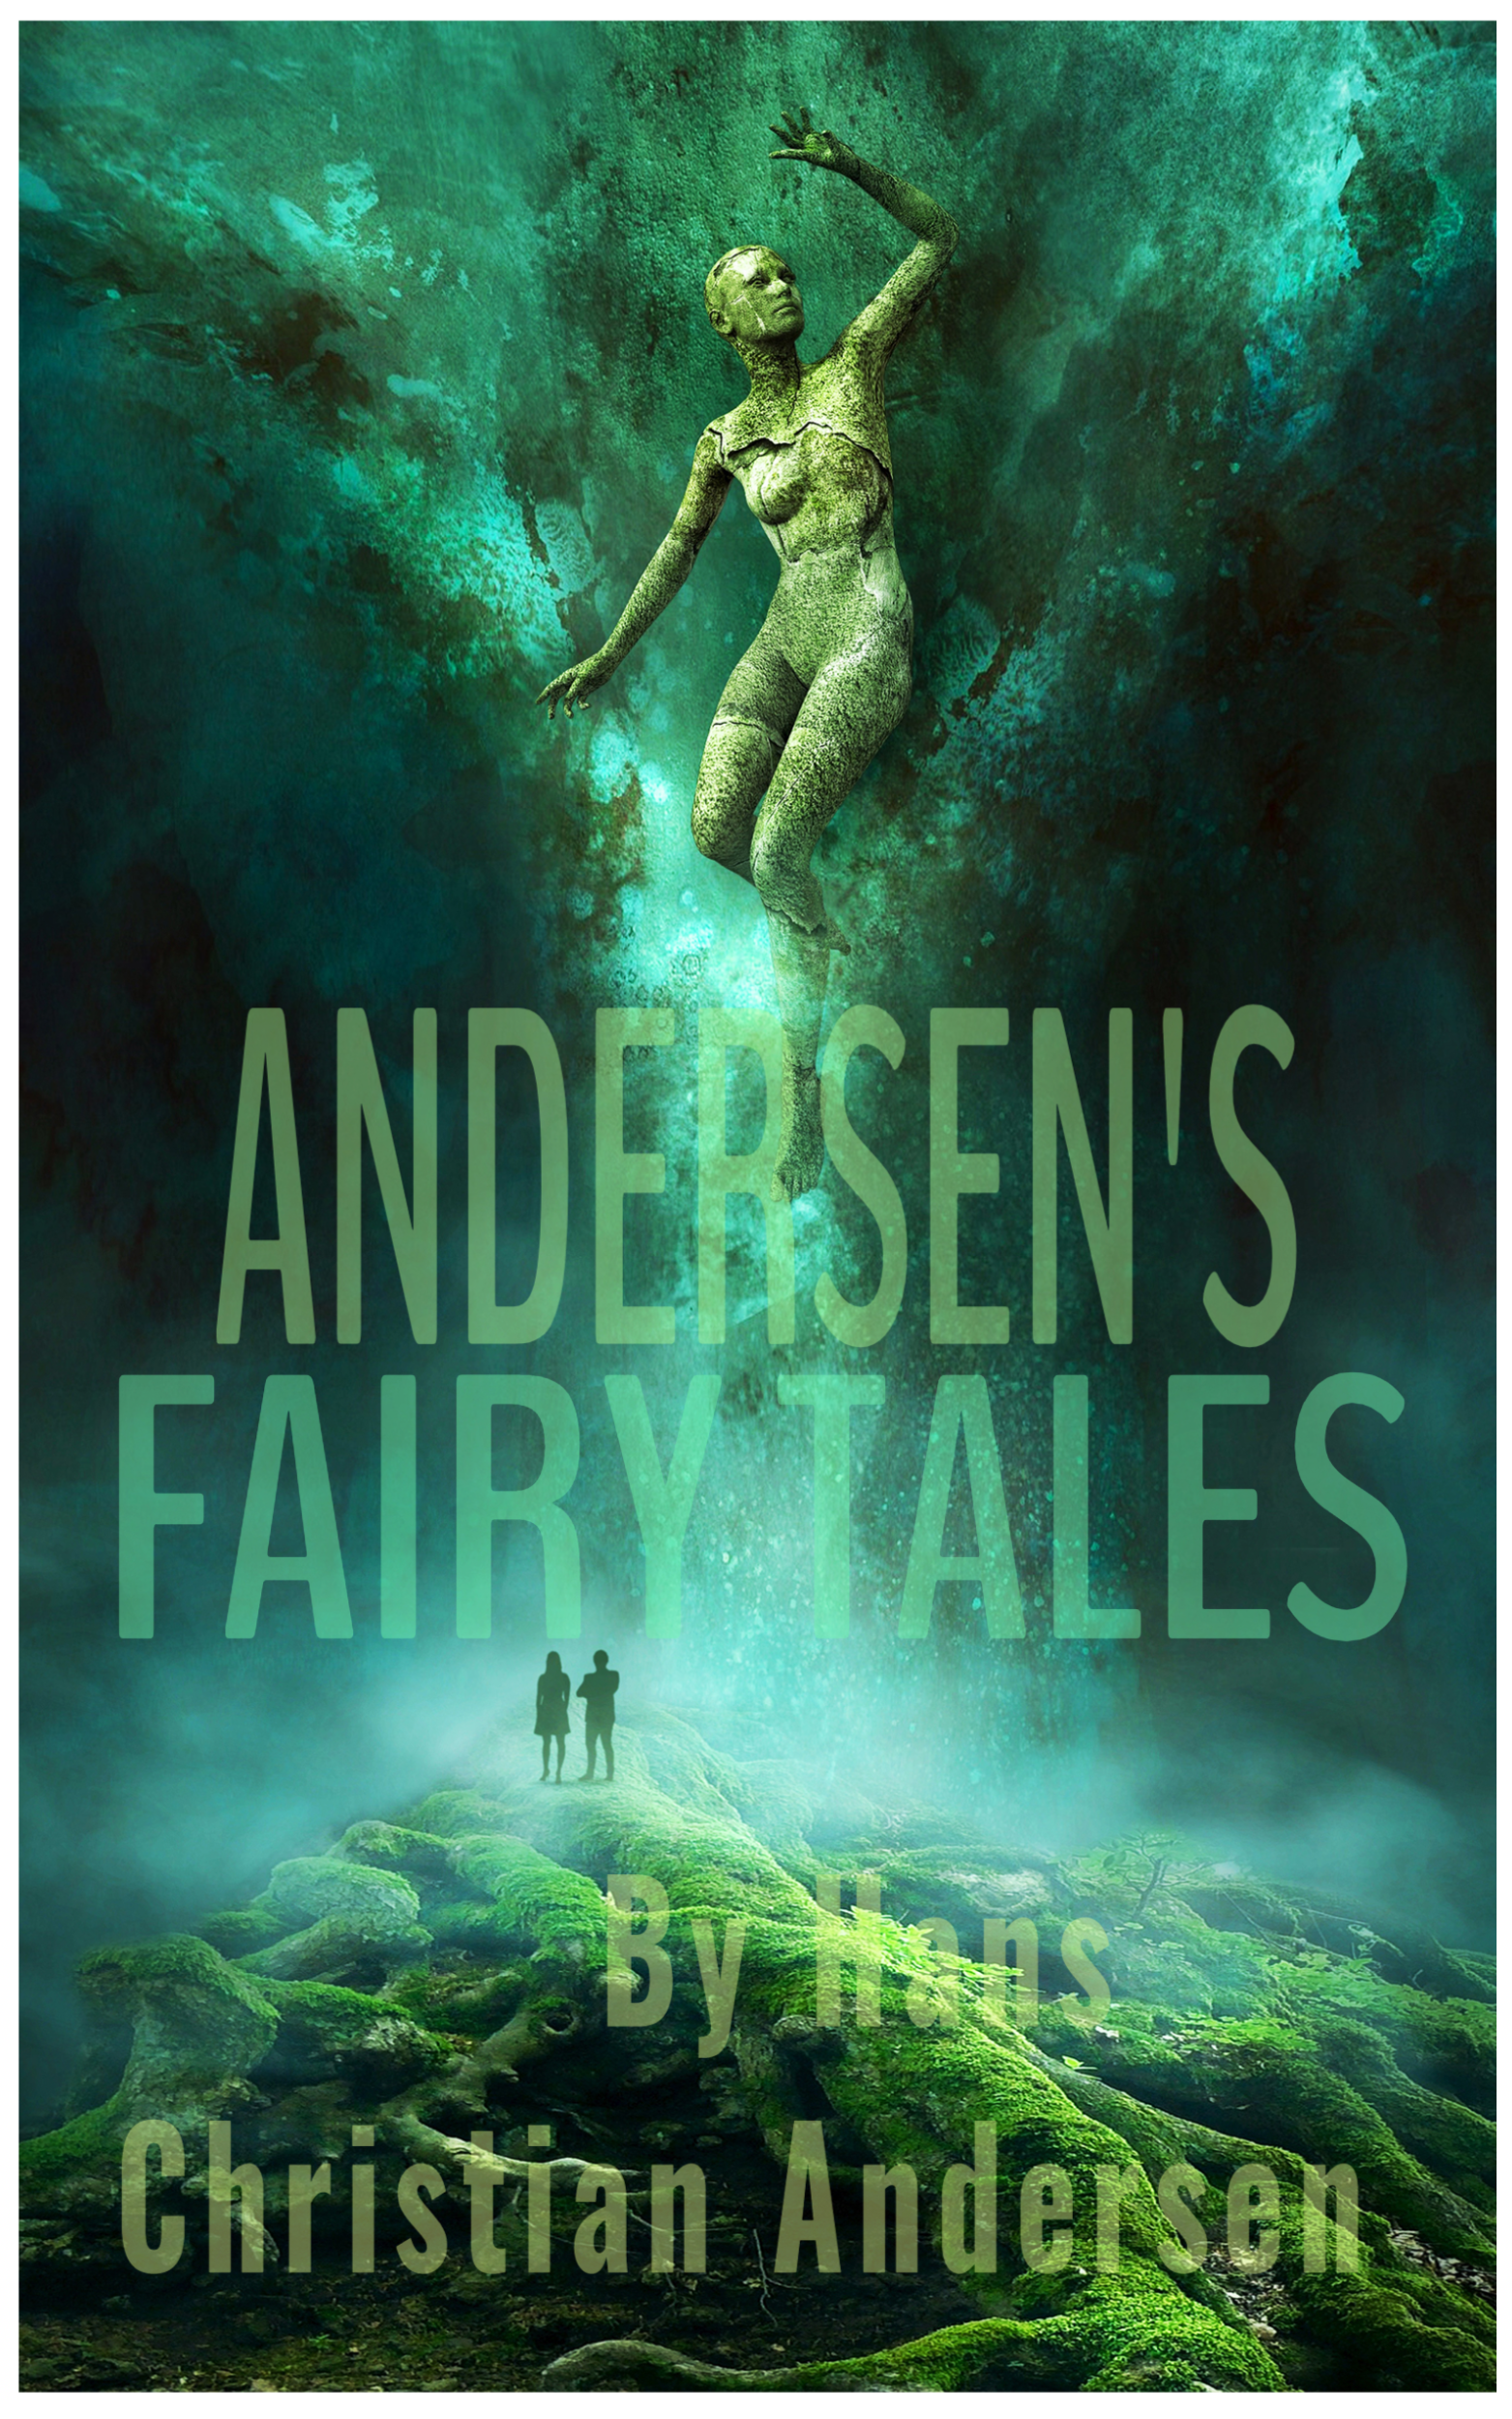 ANDERSEN’S FAIRY TALES -THE EMPEROR’S NEW CLOTHES